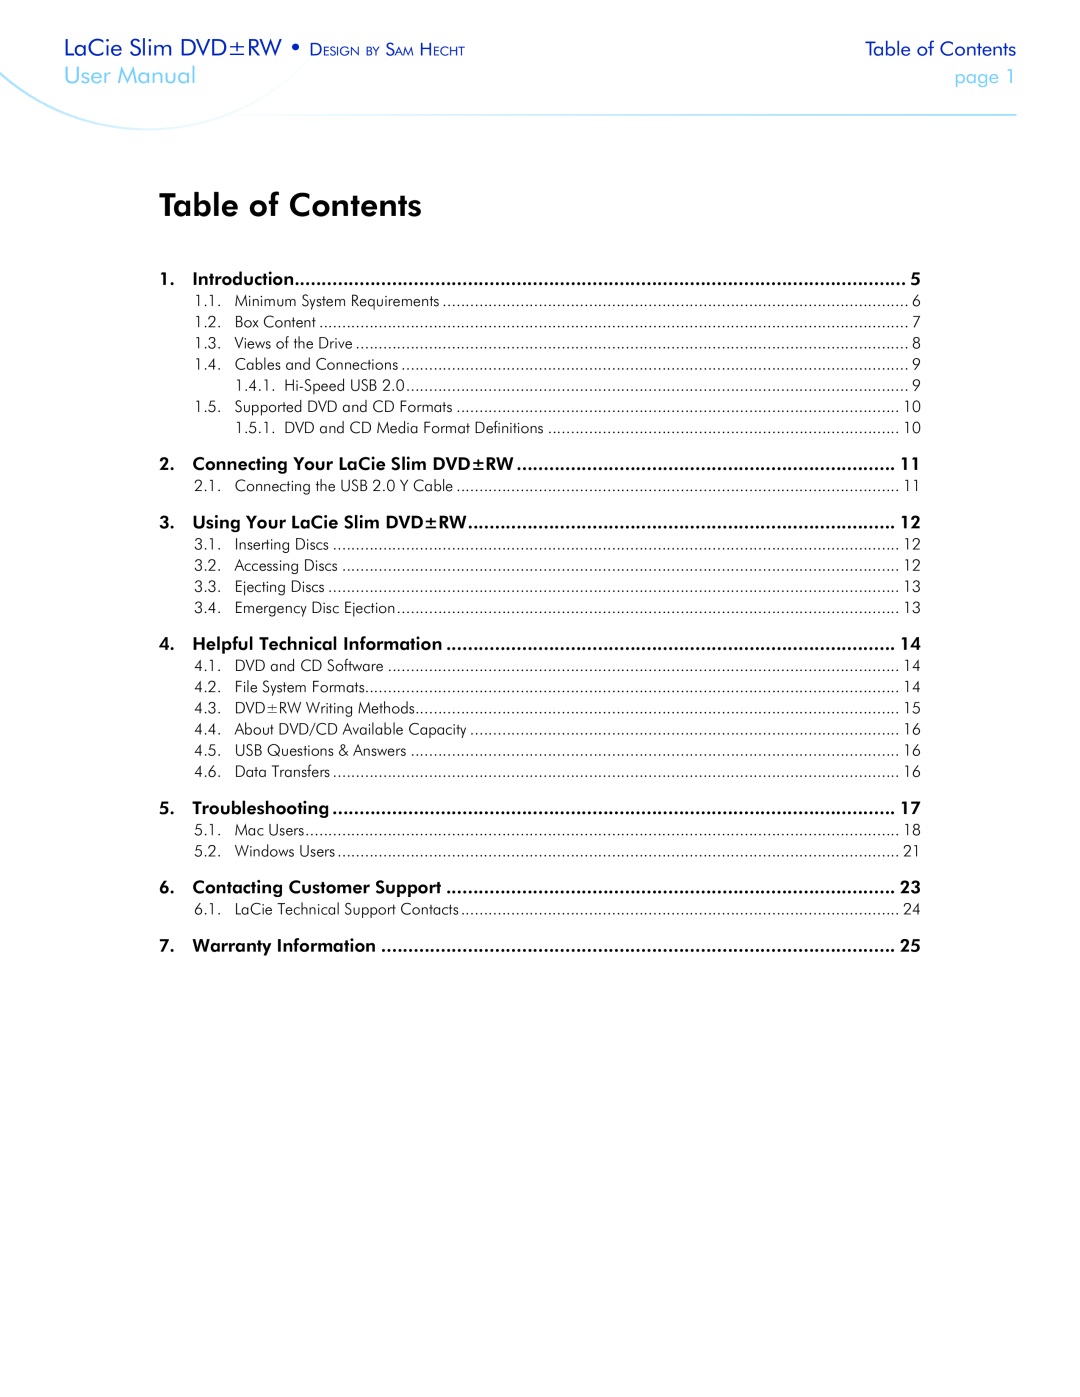 LaCie 301910 user manual Table of Contents, LaCie Slim DVD±RW D esign by S am H echt, User Manual, page, Introduction 